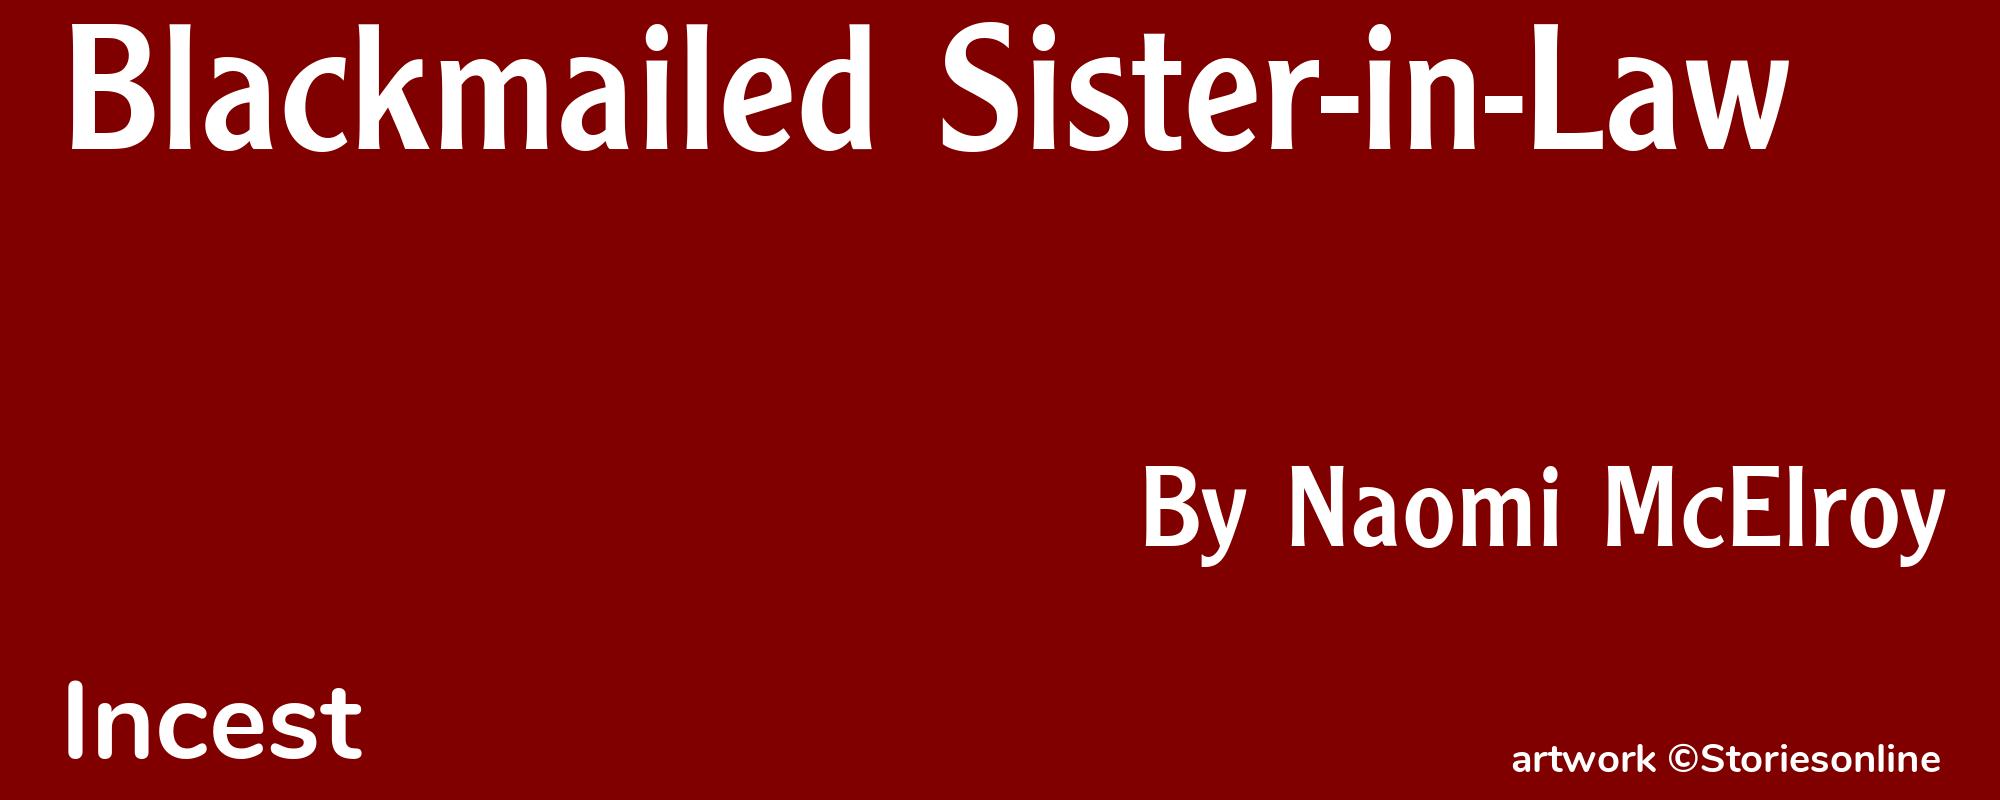 Blackmailed Sister-in-Law - Cover